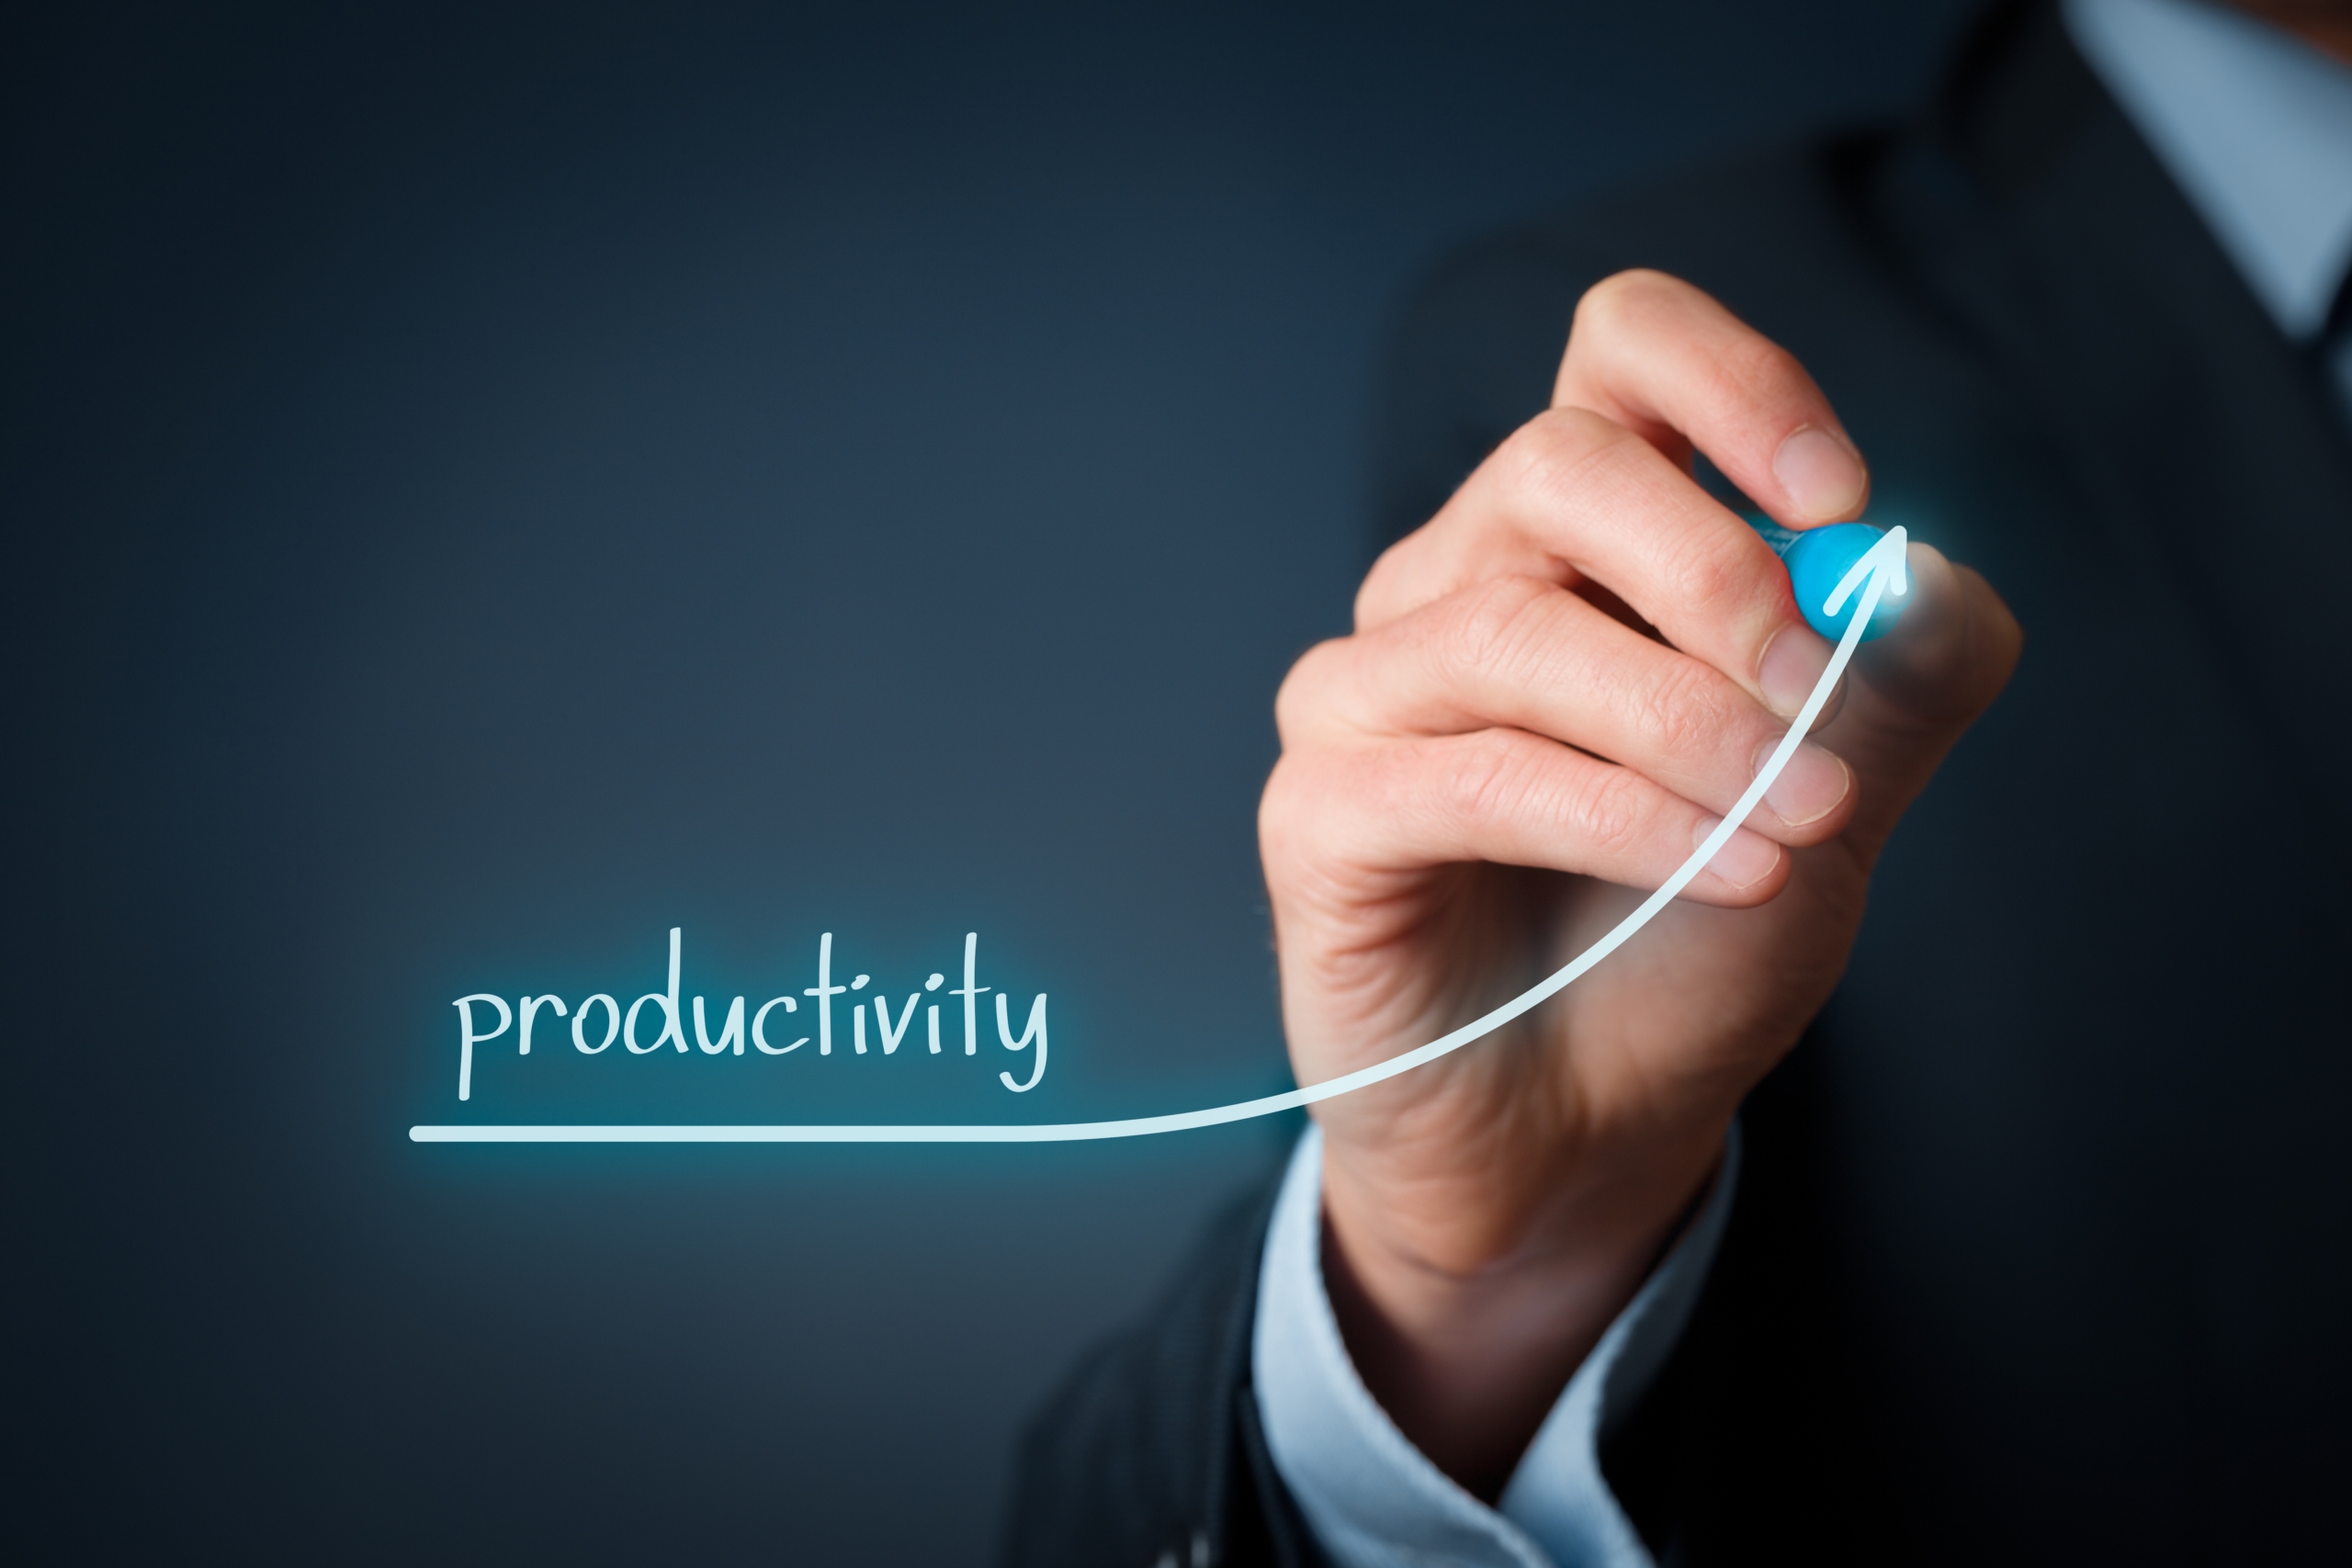 Read Now | Working away on business? Here are 5 ways to productively spend your time | Cotels Serviced Apartments